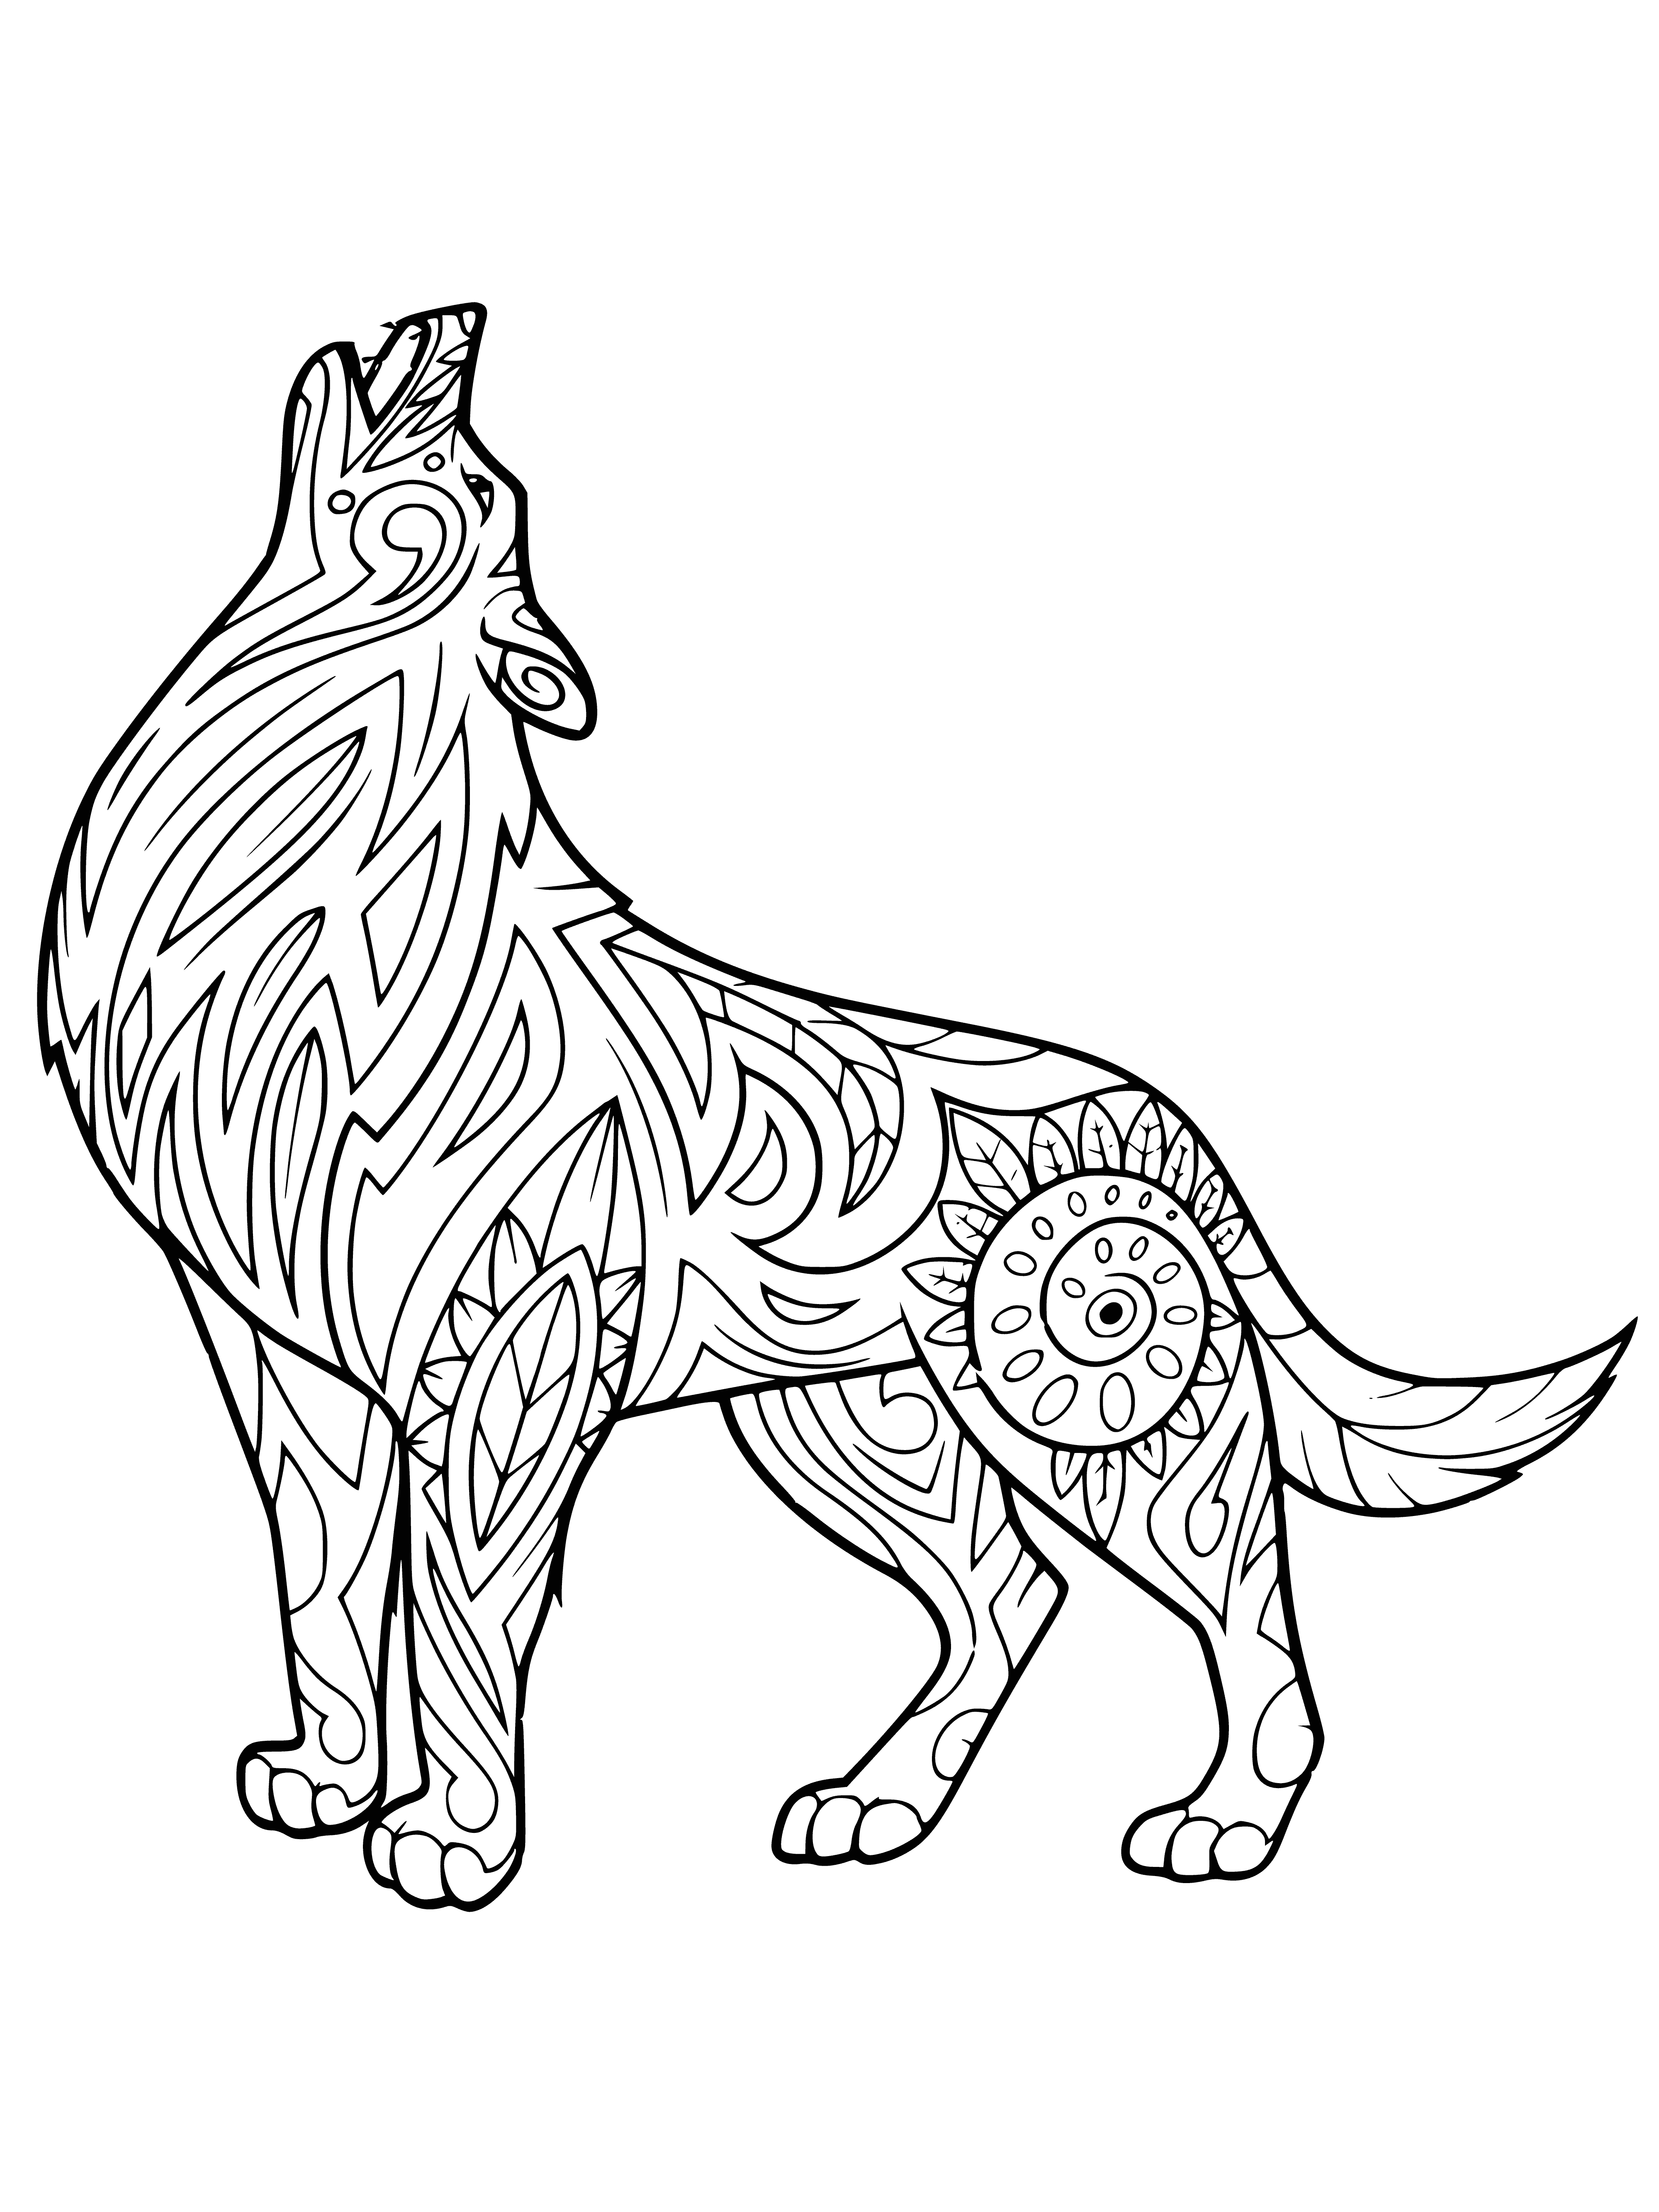 coloring page: Beautiful coloring page of a wolf howling at the moon in a dark sky with stars and blue skies. Perfect for animal lovers and outdoor enthusiasts! #coloringpages